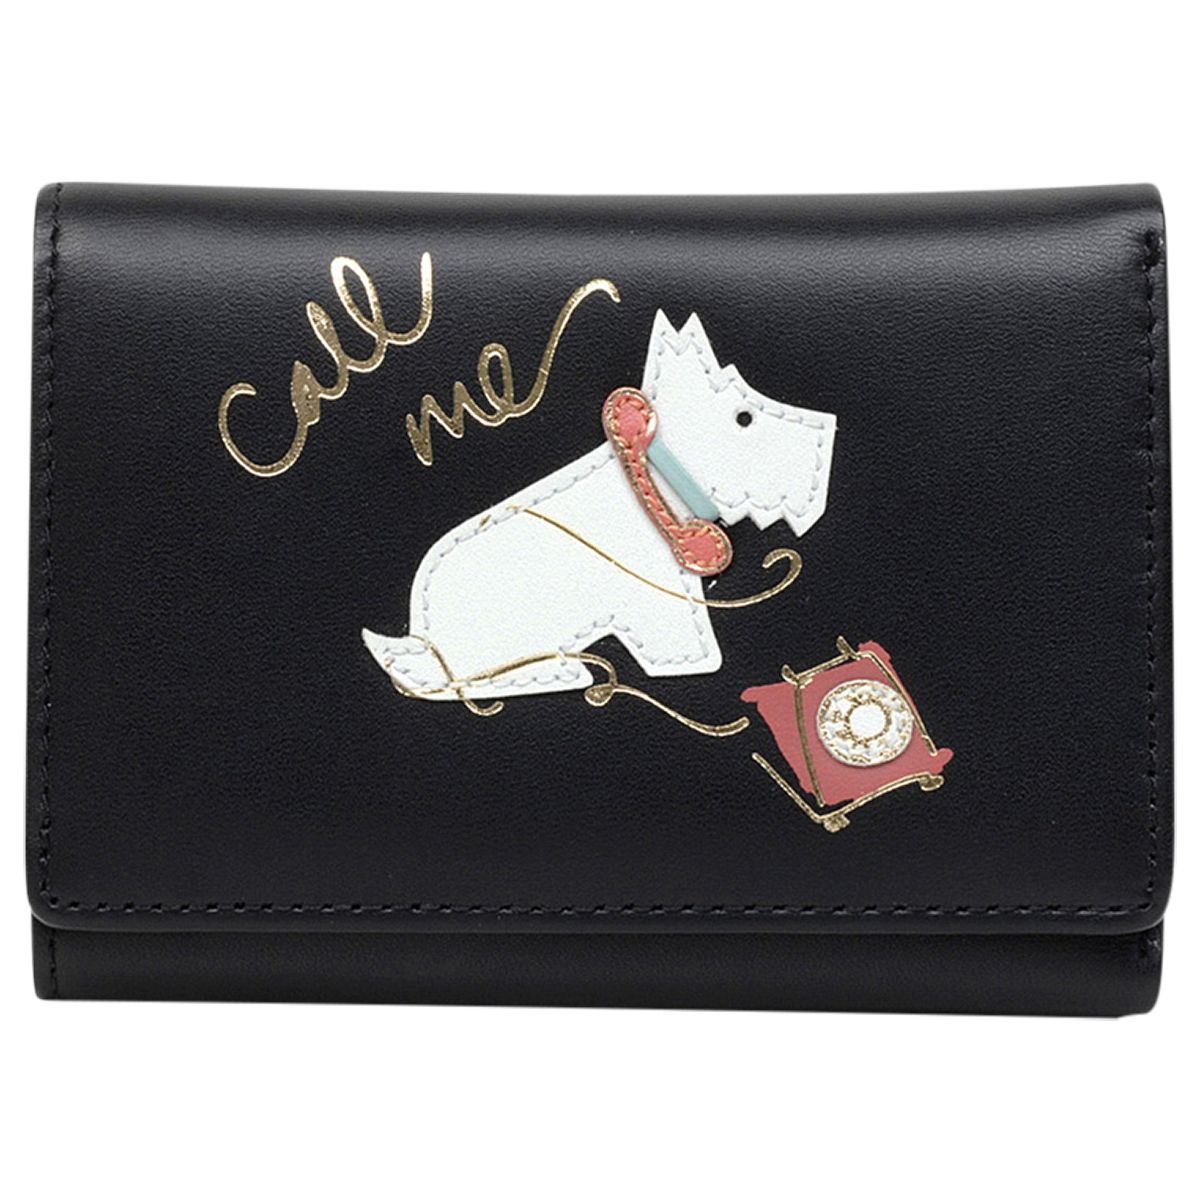 Radley Call Me Leather Small Fold Purse at John Lewis & Partners